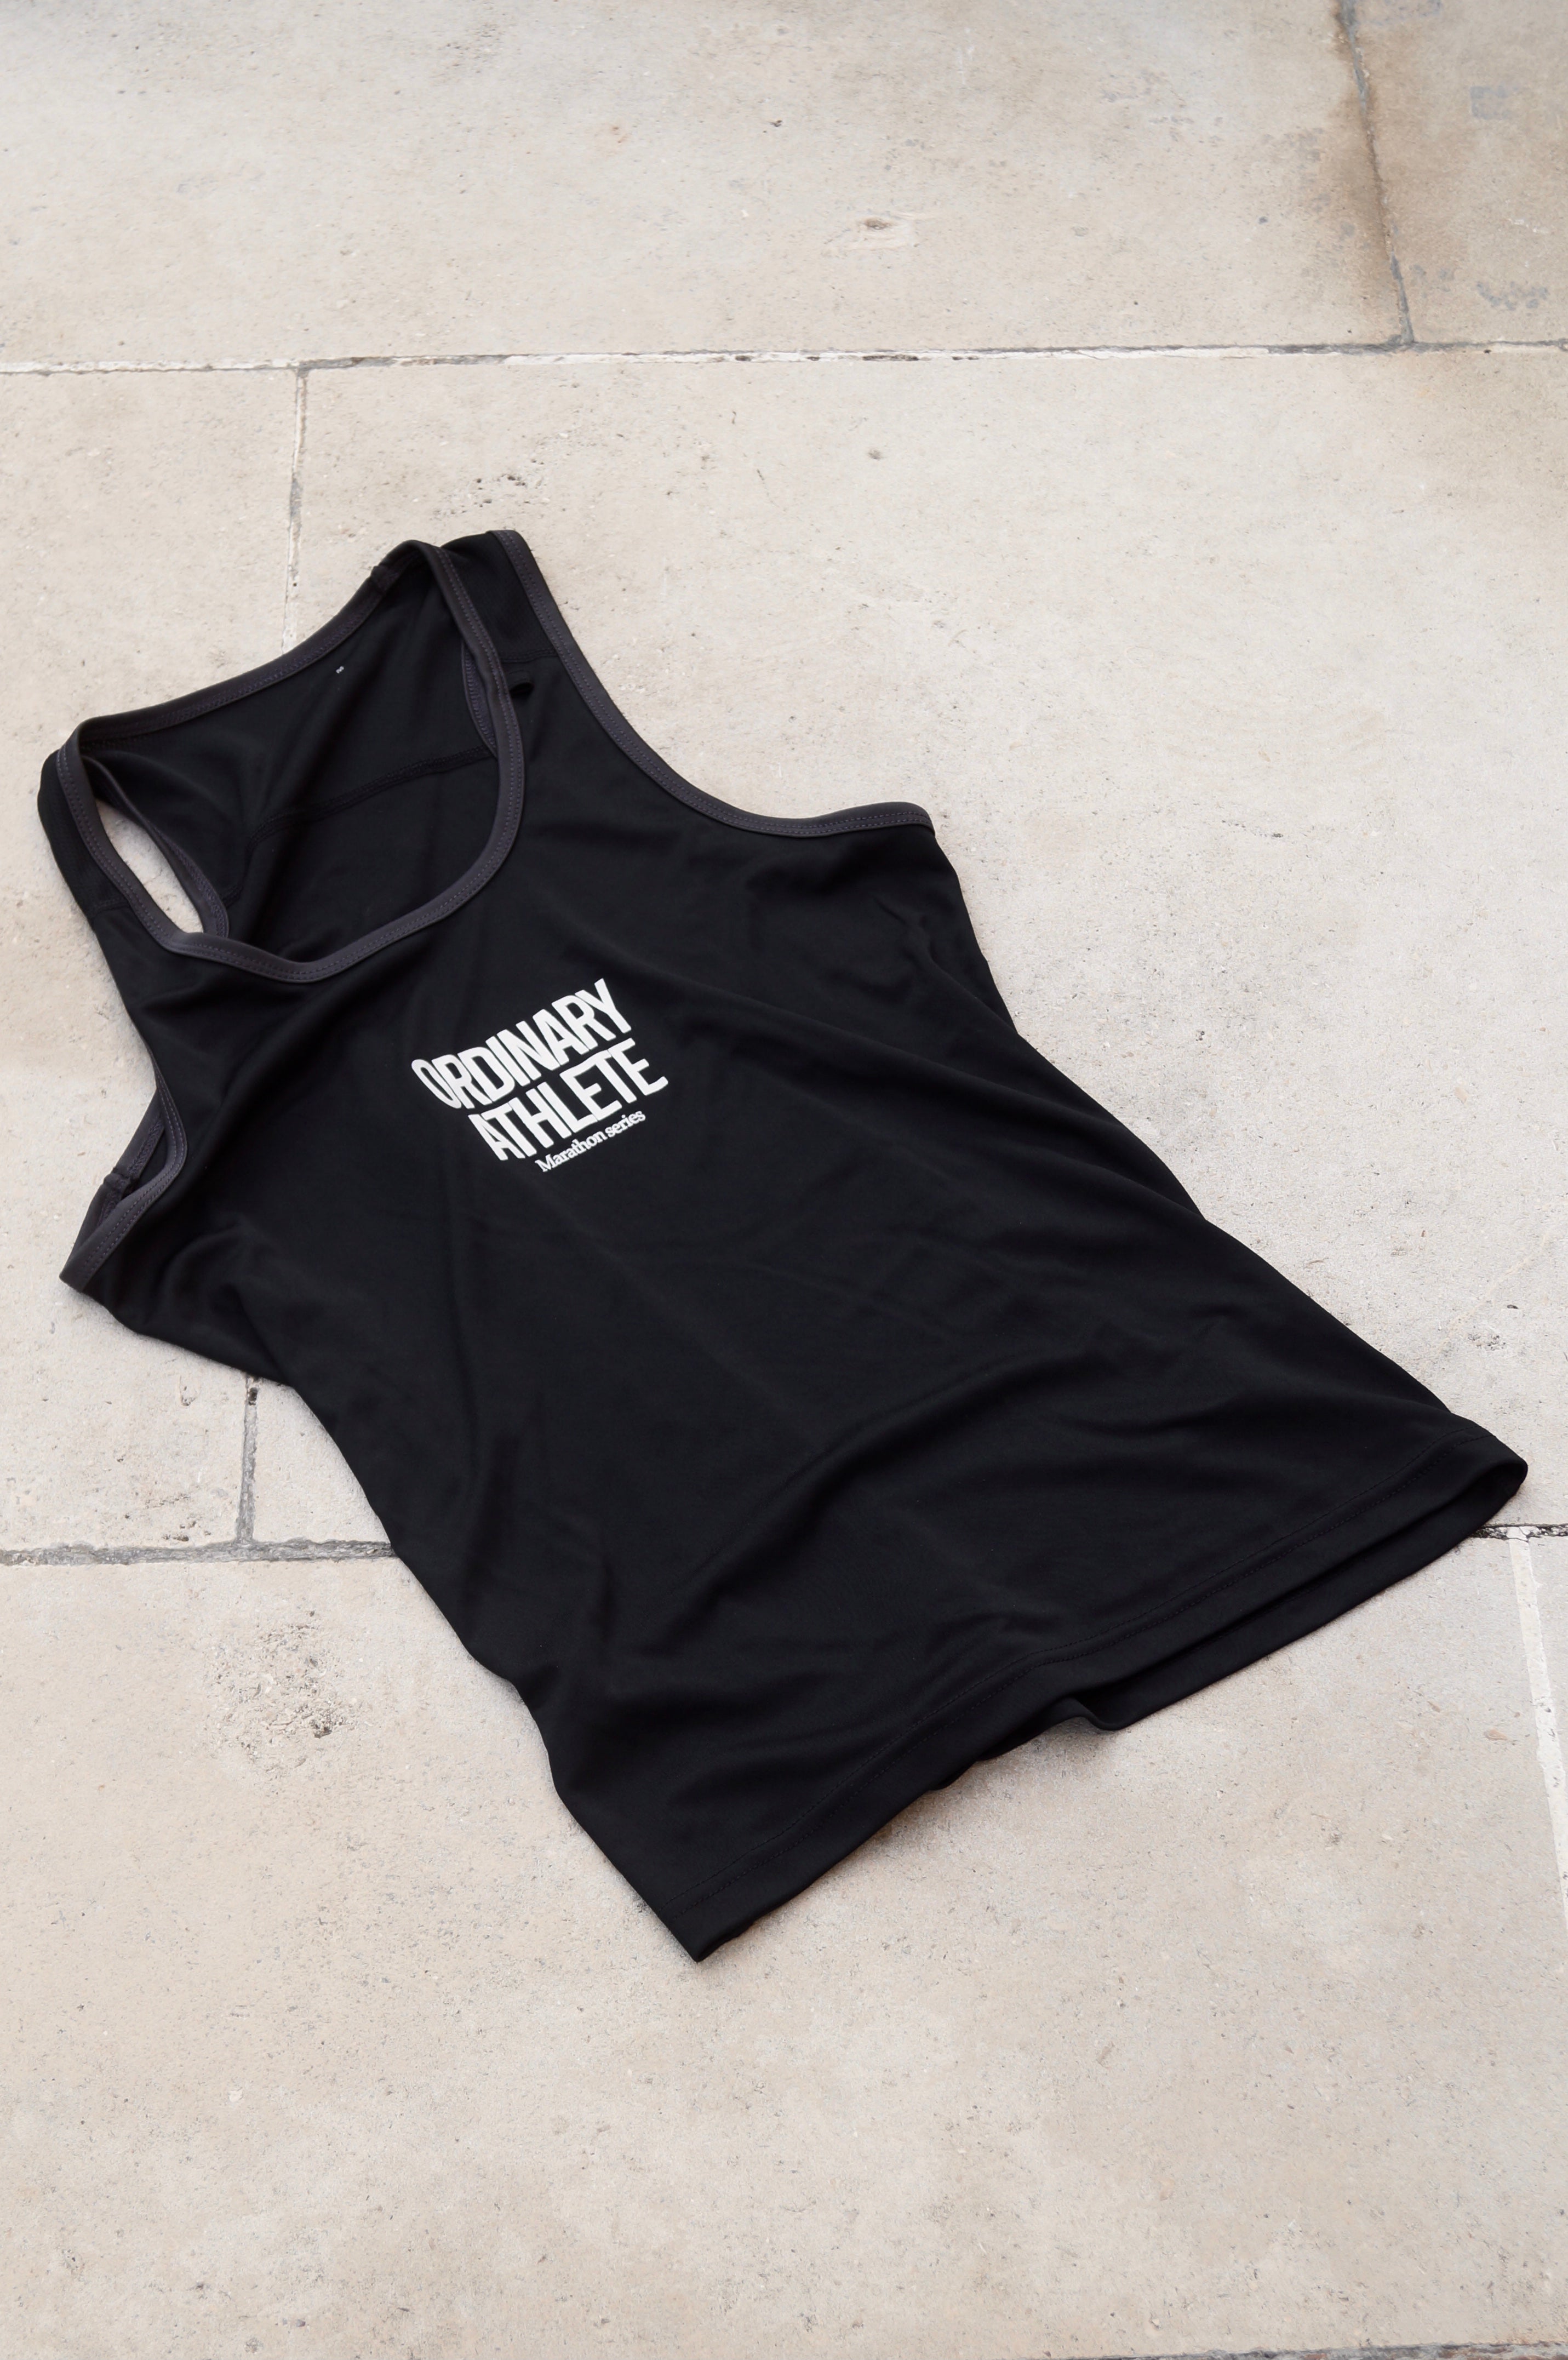 ‘Live for the moment’ Women’s Performance Vest